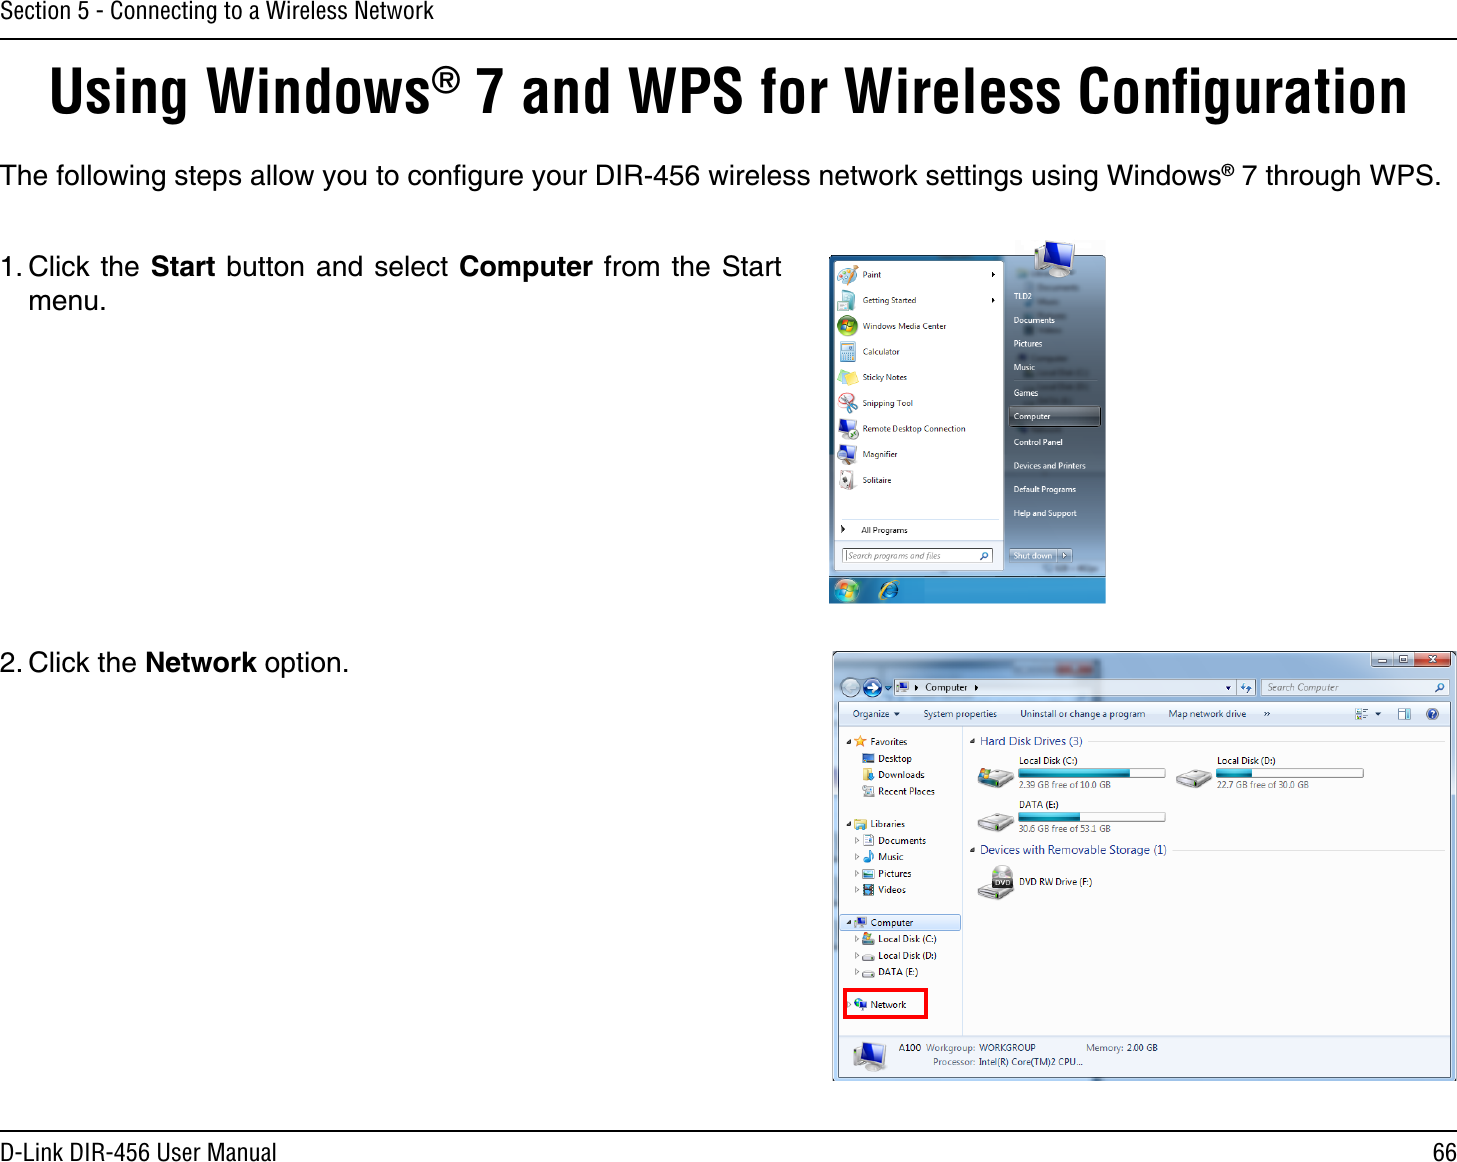 66D-Link DIR-456 User ManualSection 5 - Connecting to a Wireless NetworkUsing Windows® 7 and WPS for Wireless ConﬁgurationThe following steps allow you to conﬁgure your DIR-456 wireless network settings using Windows® 7 through WPS.1. Click  the  Start button and select Computer from the Start menu.2. Click the Network option.